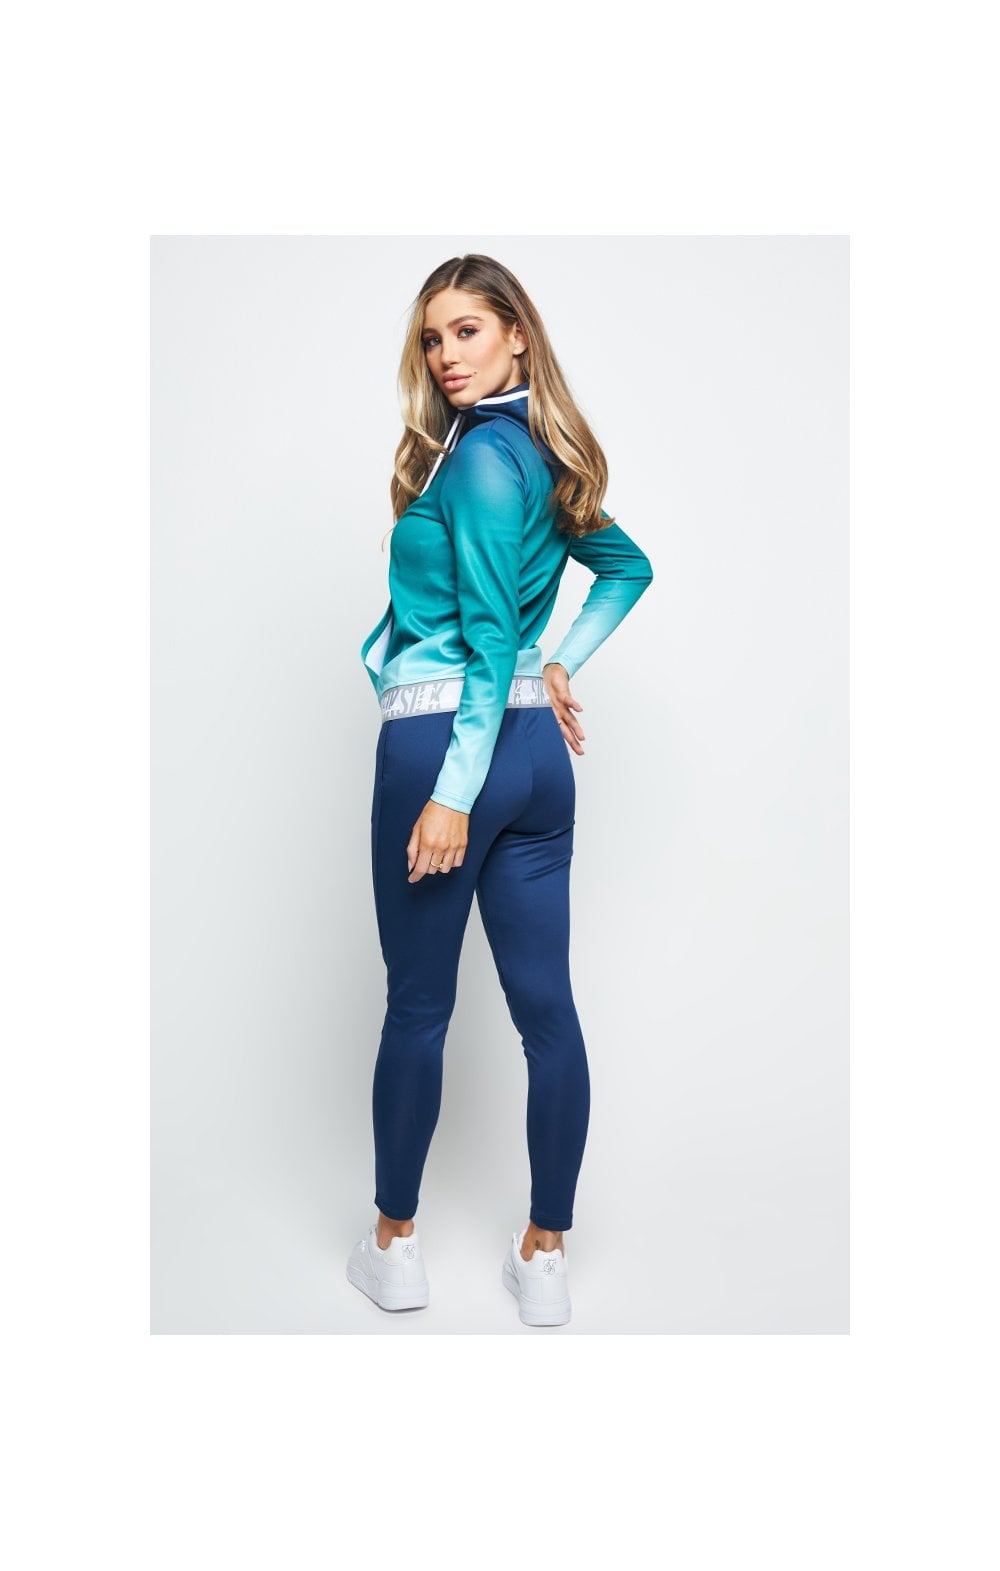 SikSilk Fade Tape Track Jacket - Navy & Teal (4)